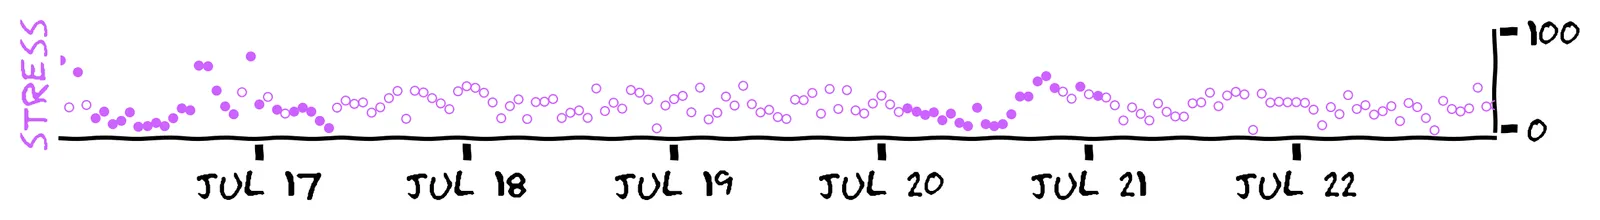 The previous plot of time vs stress measurements, with the gaps filled in differently: the outlined purple points are scattered in a normal distribution.